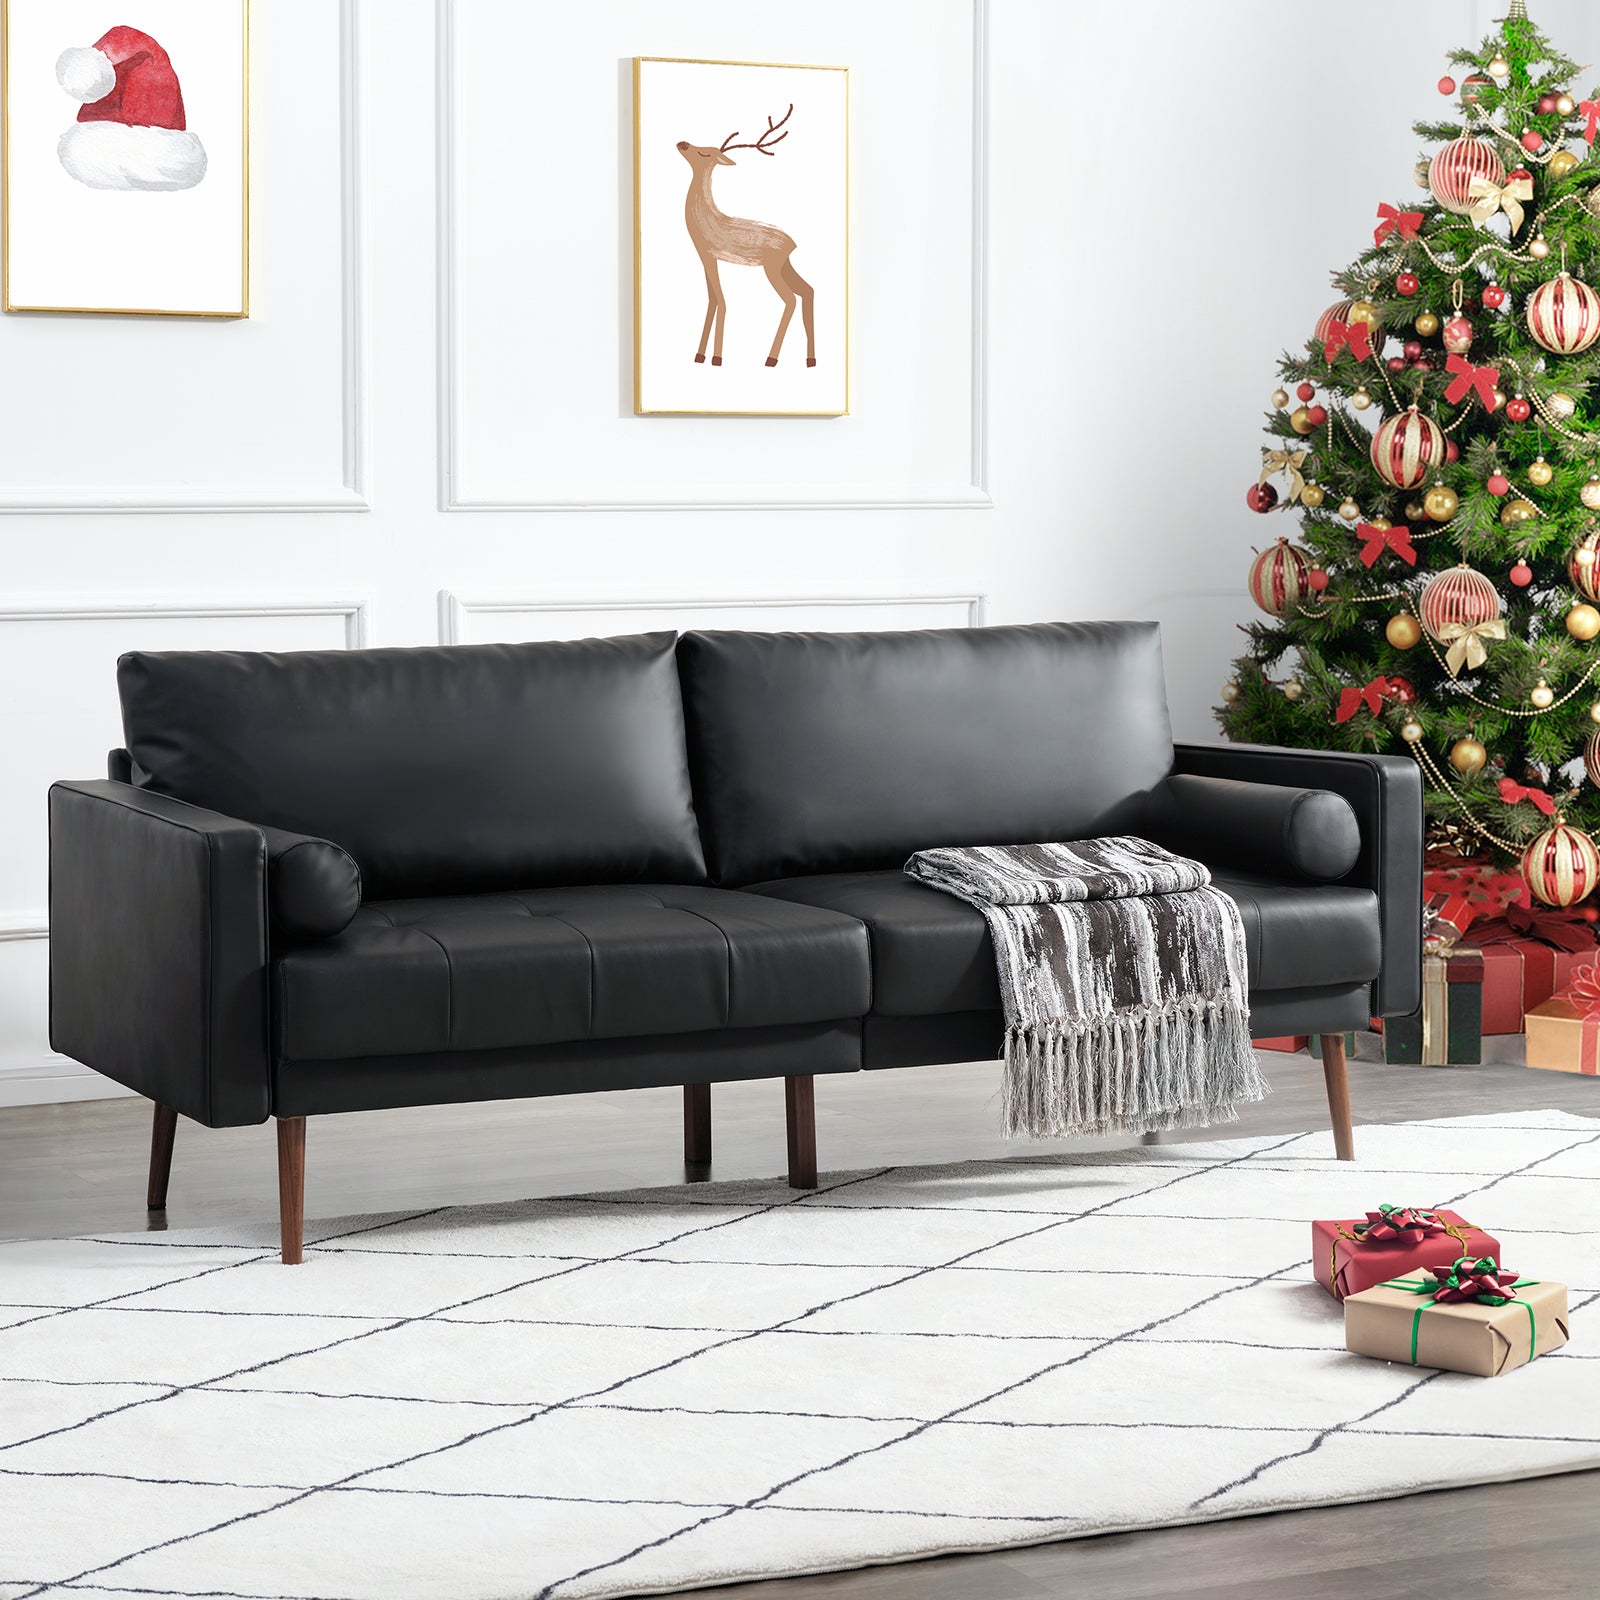 Nora Faux Leather Sofa Couch, Mid-Century 73 Inch Leather Couch with Hand-Stitched Comfort Cushion and Bolster Pillows